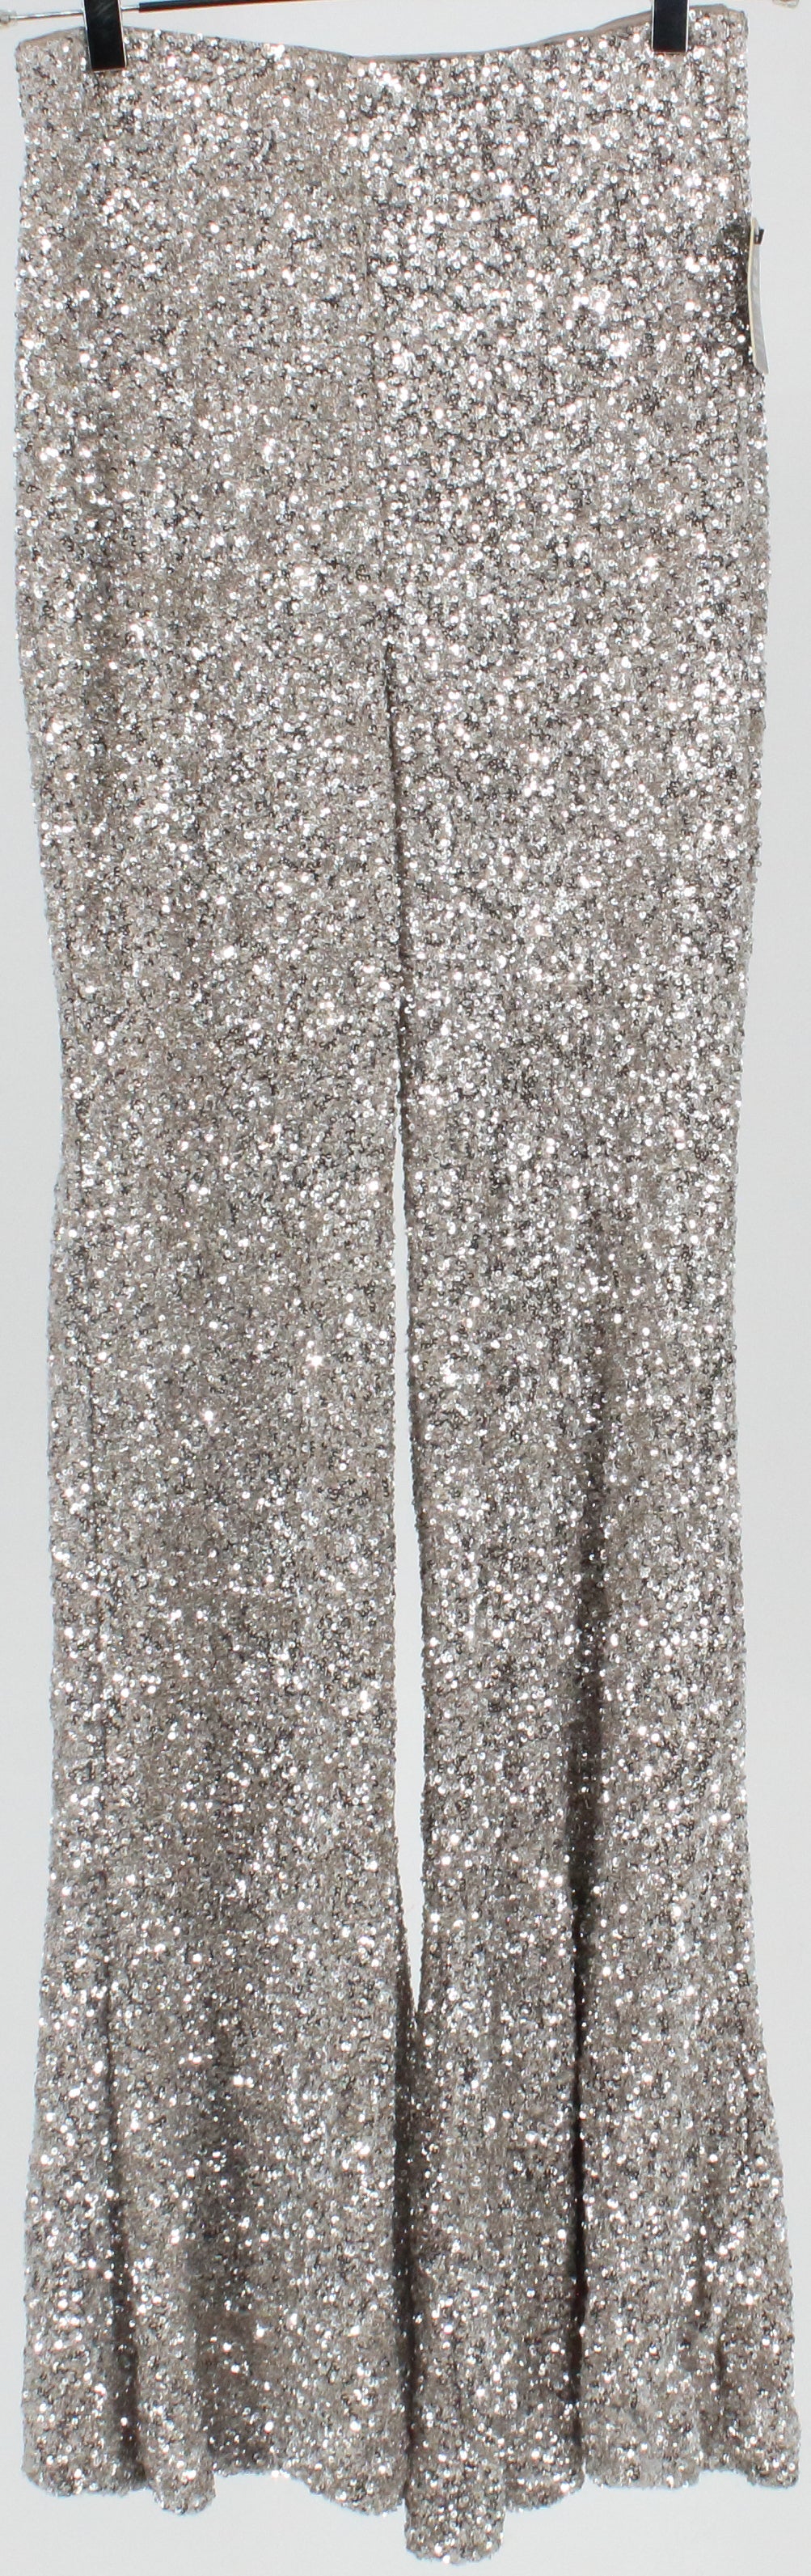 Express Silver Sequins Flared High Rise Pants